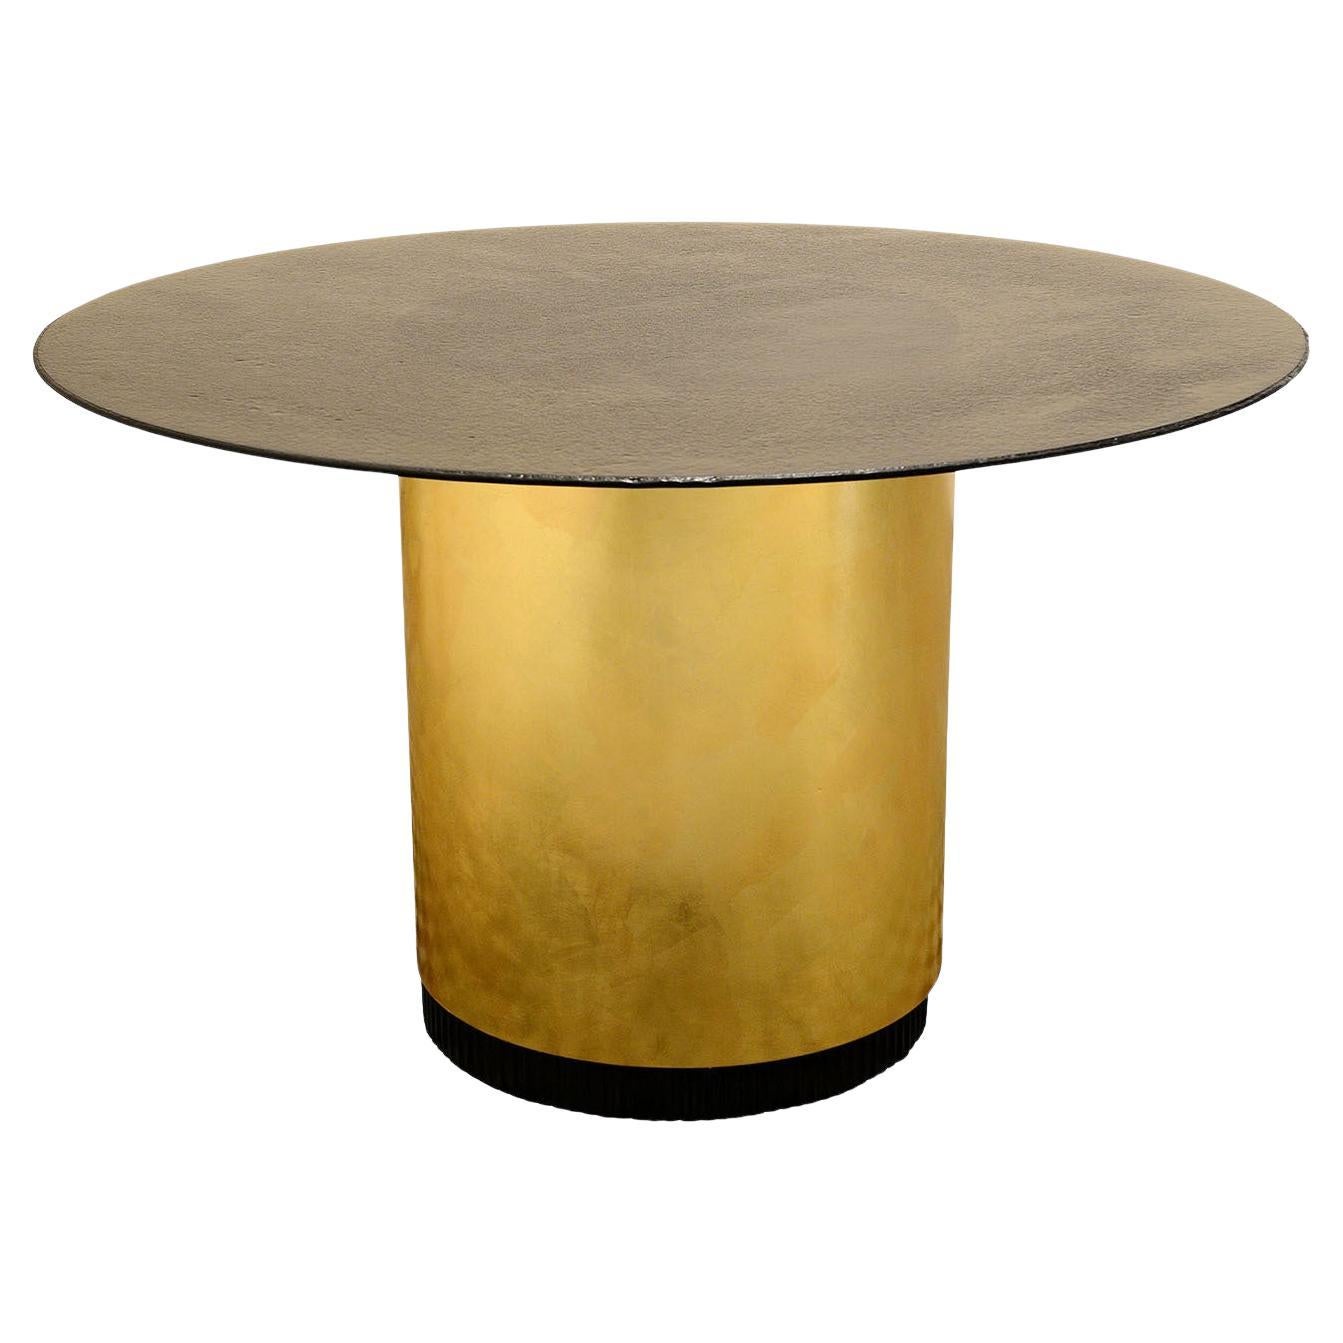 Elemento M.I.40.10 Round Golden & Bronzed Table For Sale